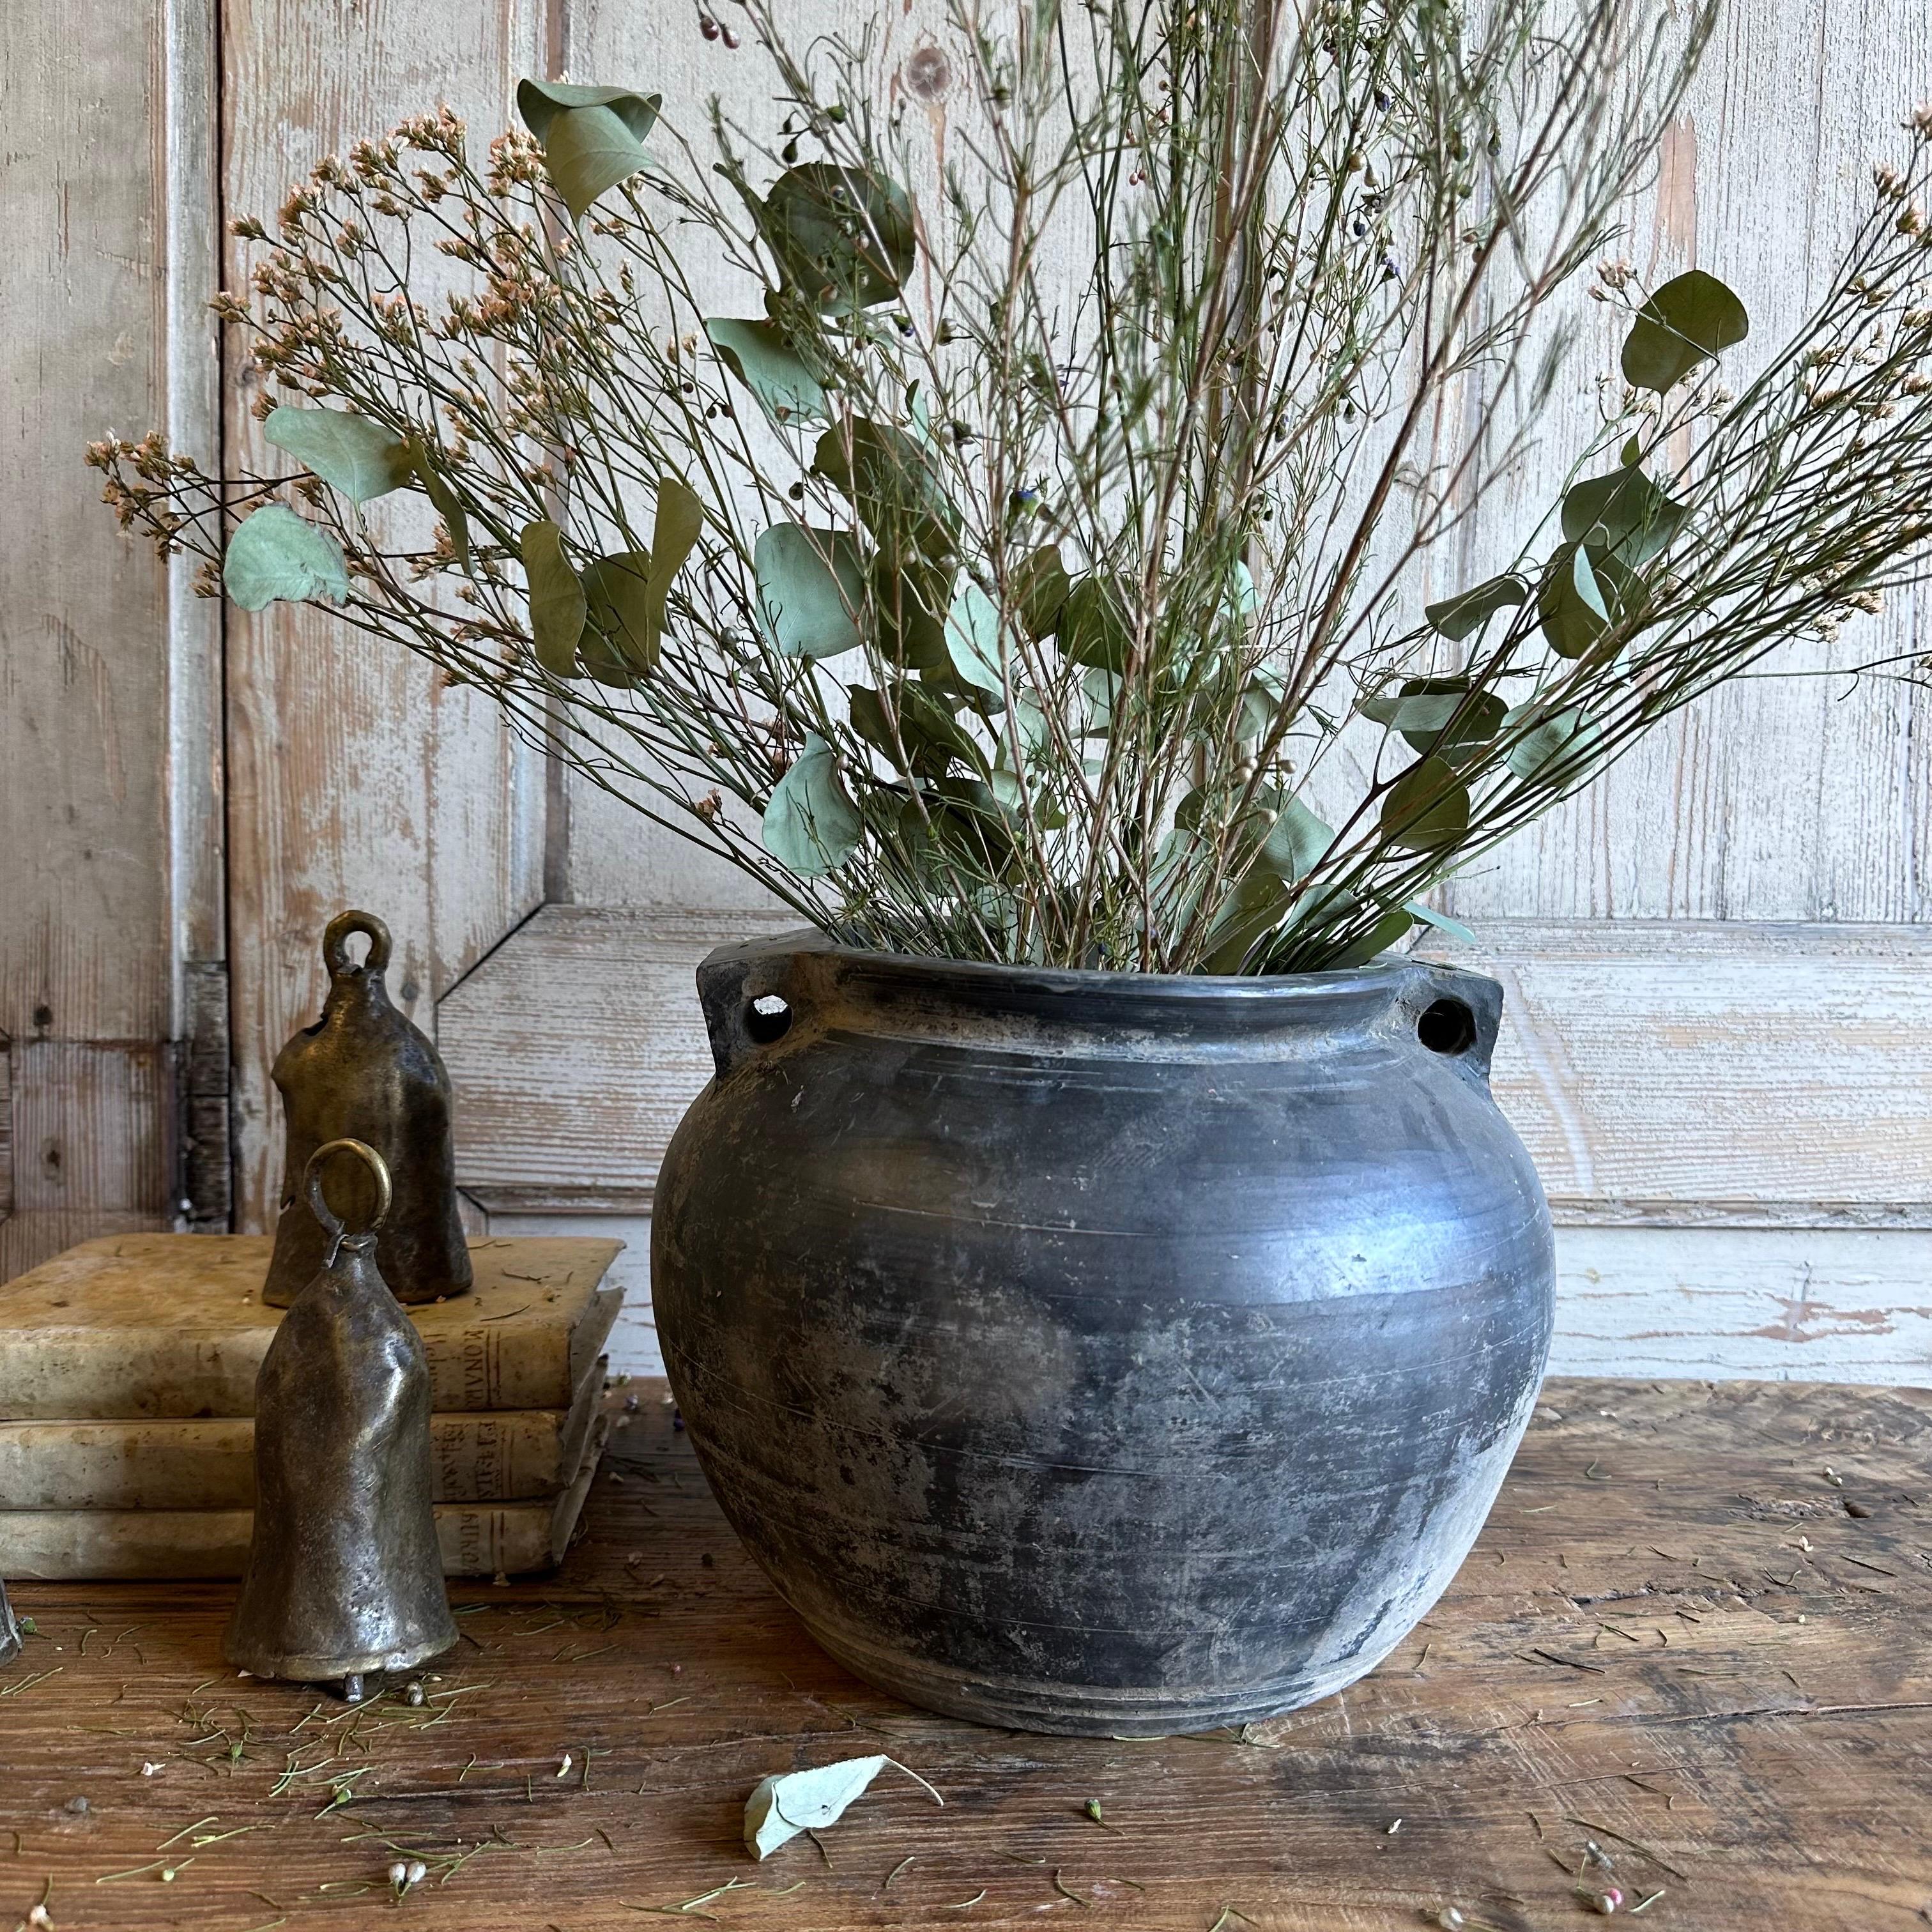 Vintage matte oil pots pottery rich in character, this vintage oil pot adds just the right amount of texture + warmth where you need it. Stunning matte finish with dark gray and light gray accents, with a washed antique look. Each piece is uniquely